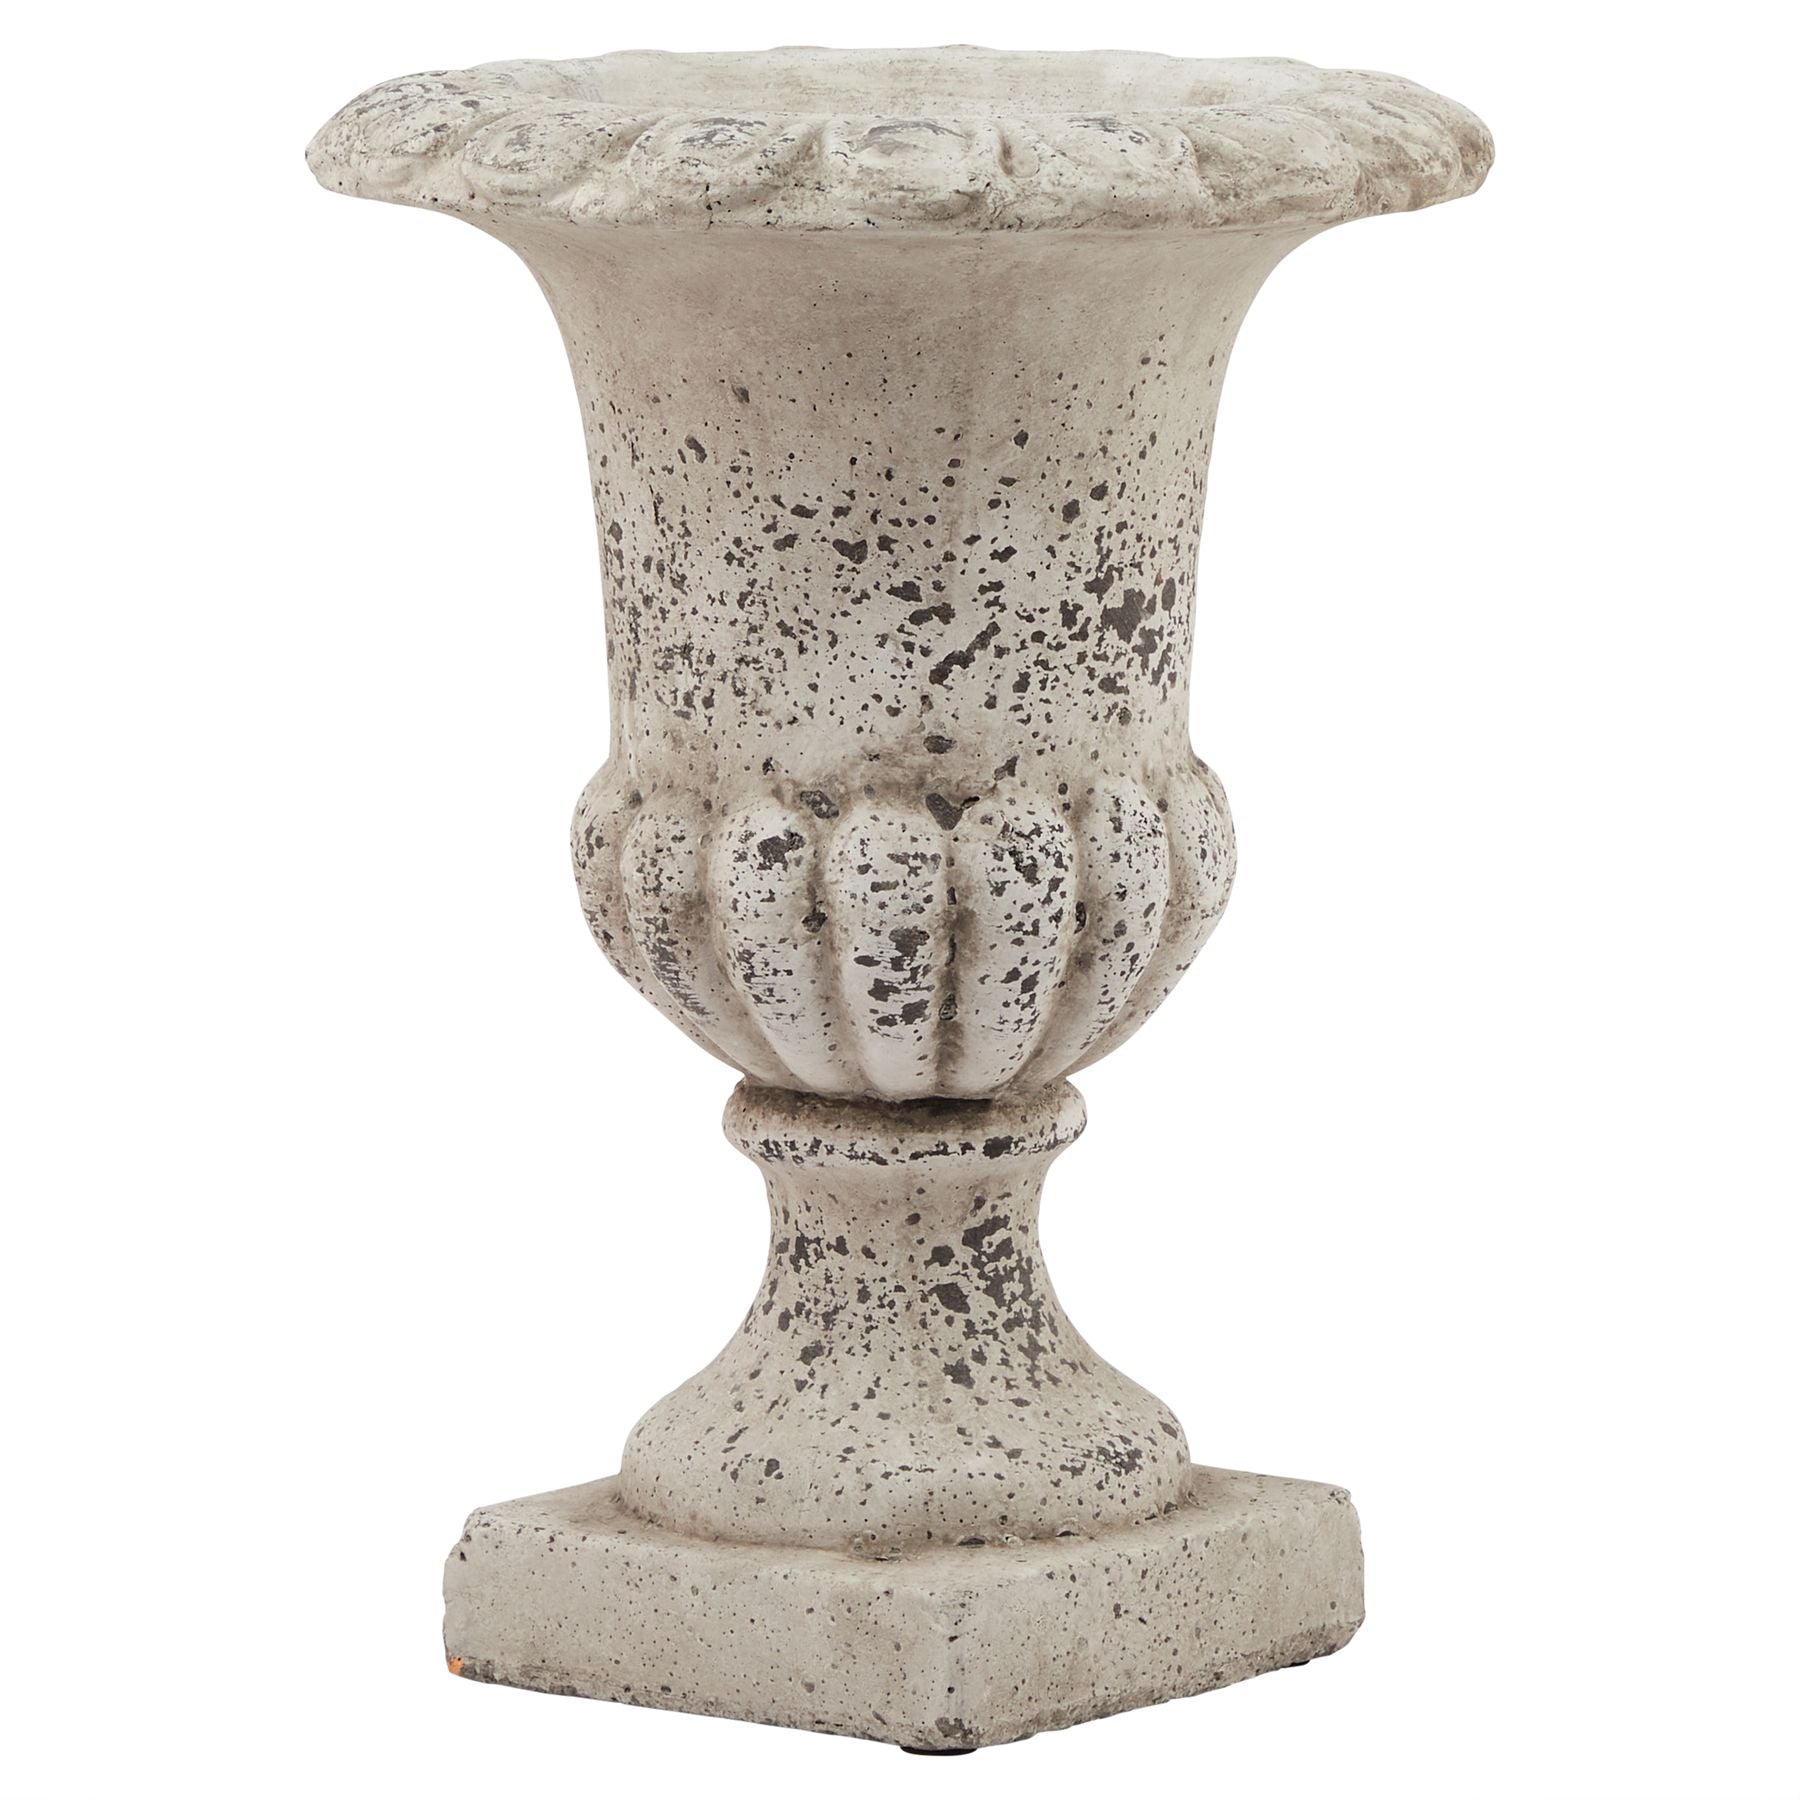 View Fluted Stone Ceramic Urn information